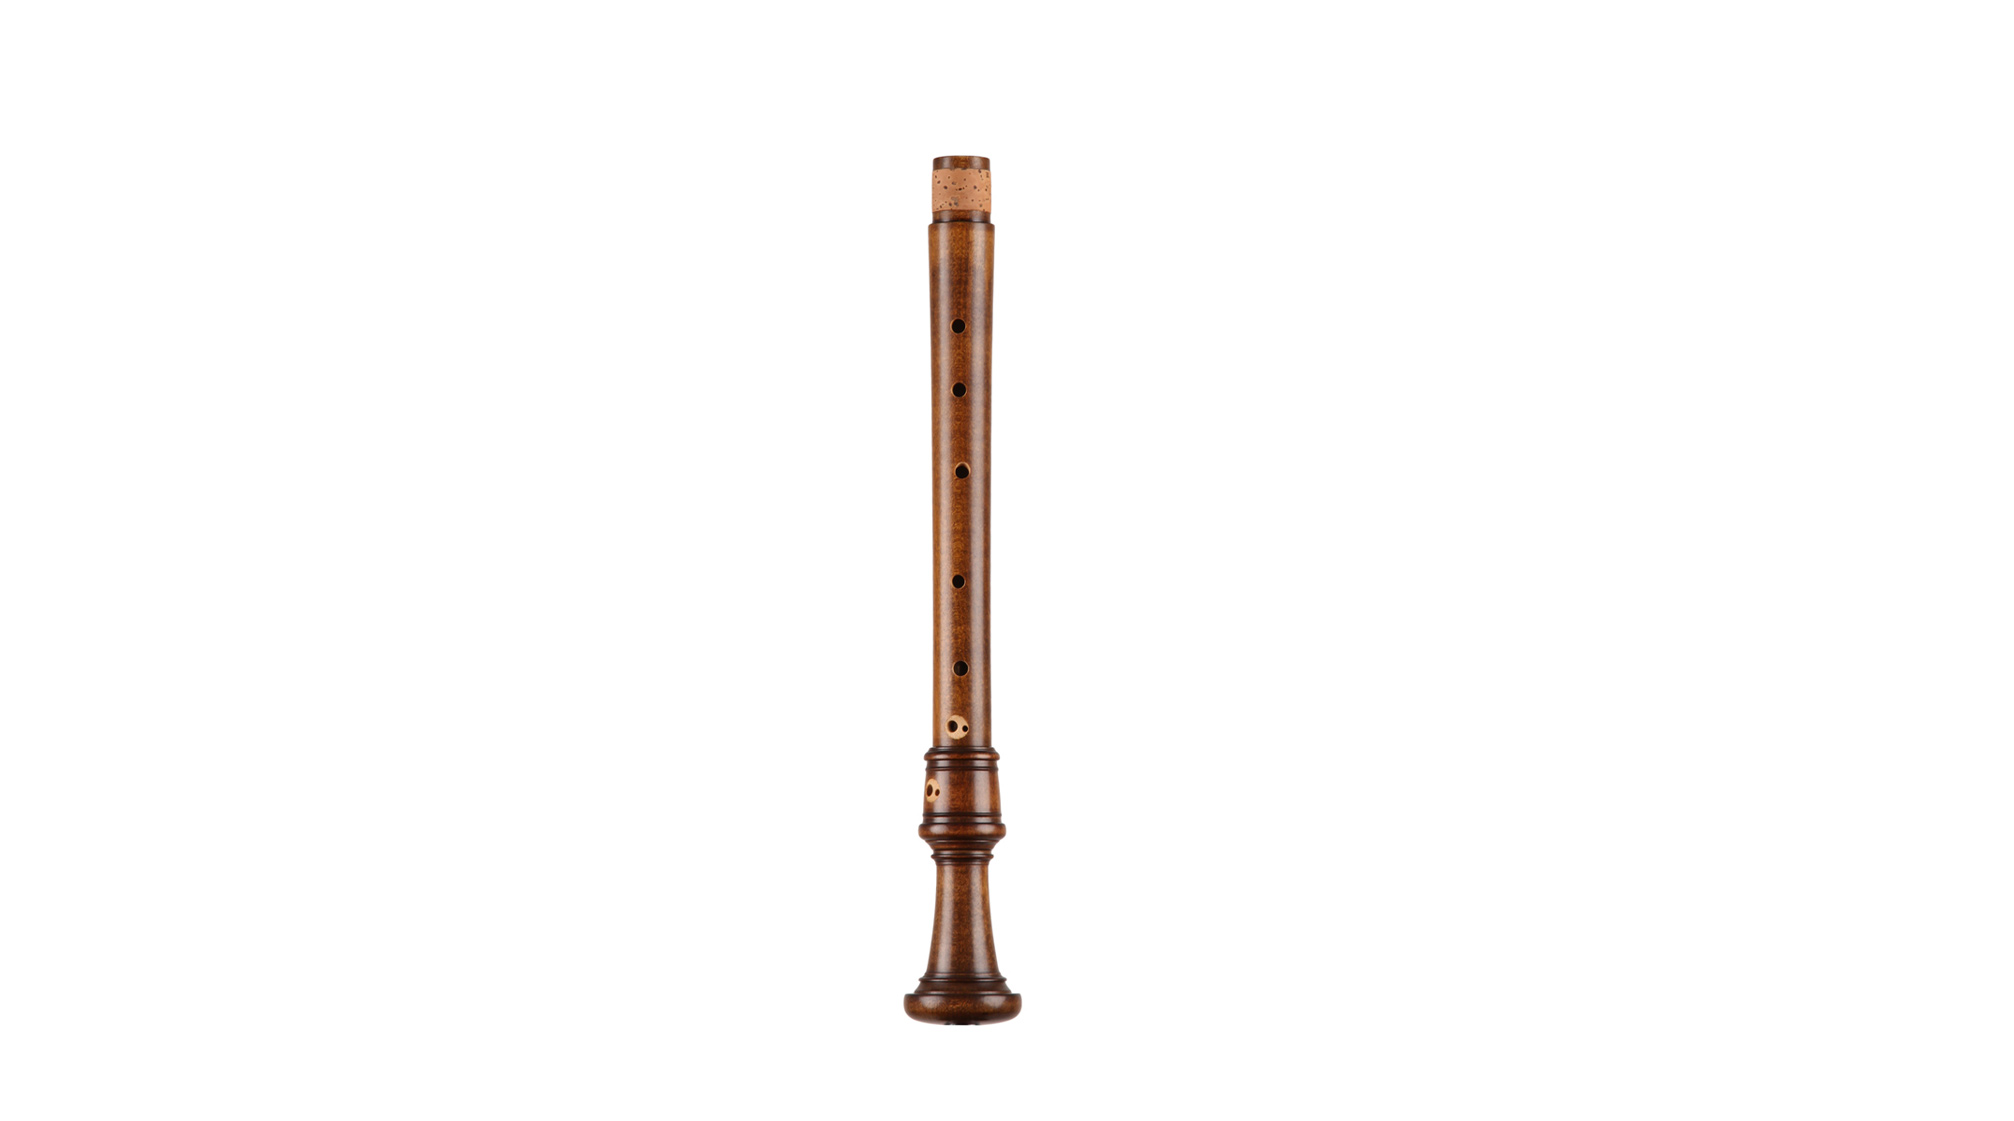 Takeyama, "Takeyama model", tenor in c', baroque double hole, 442 Hz, maple stained